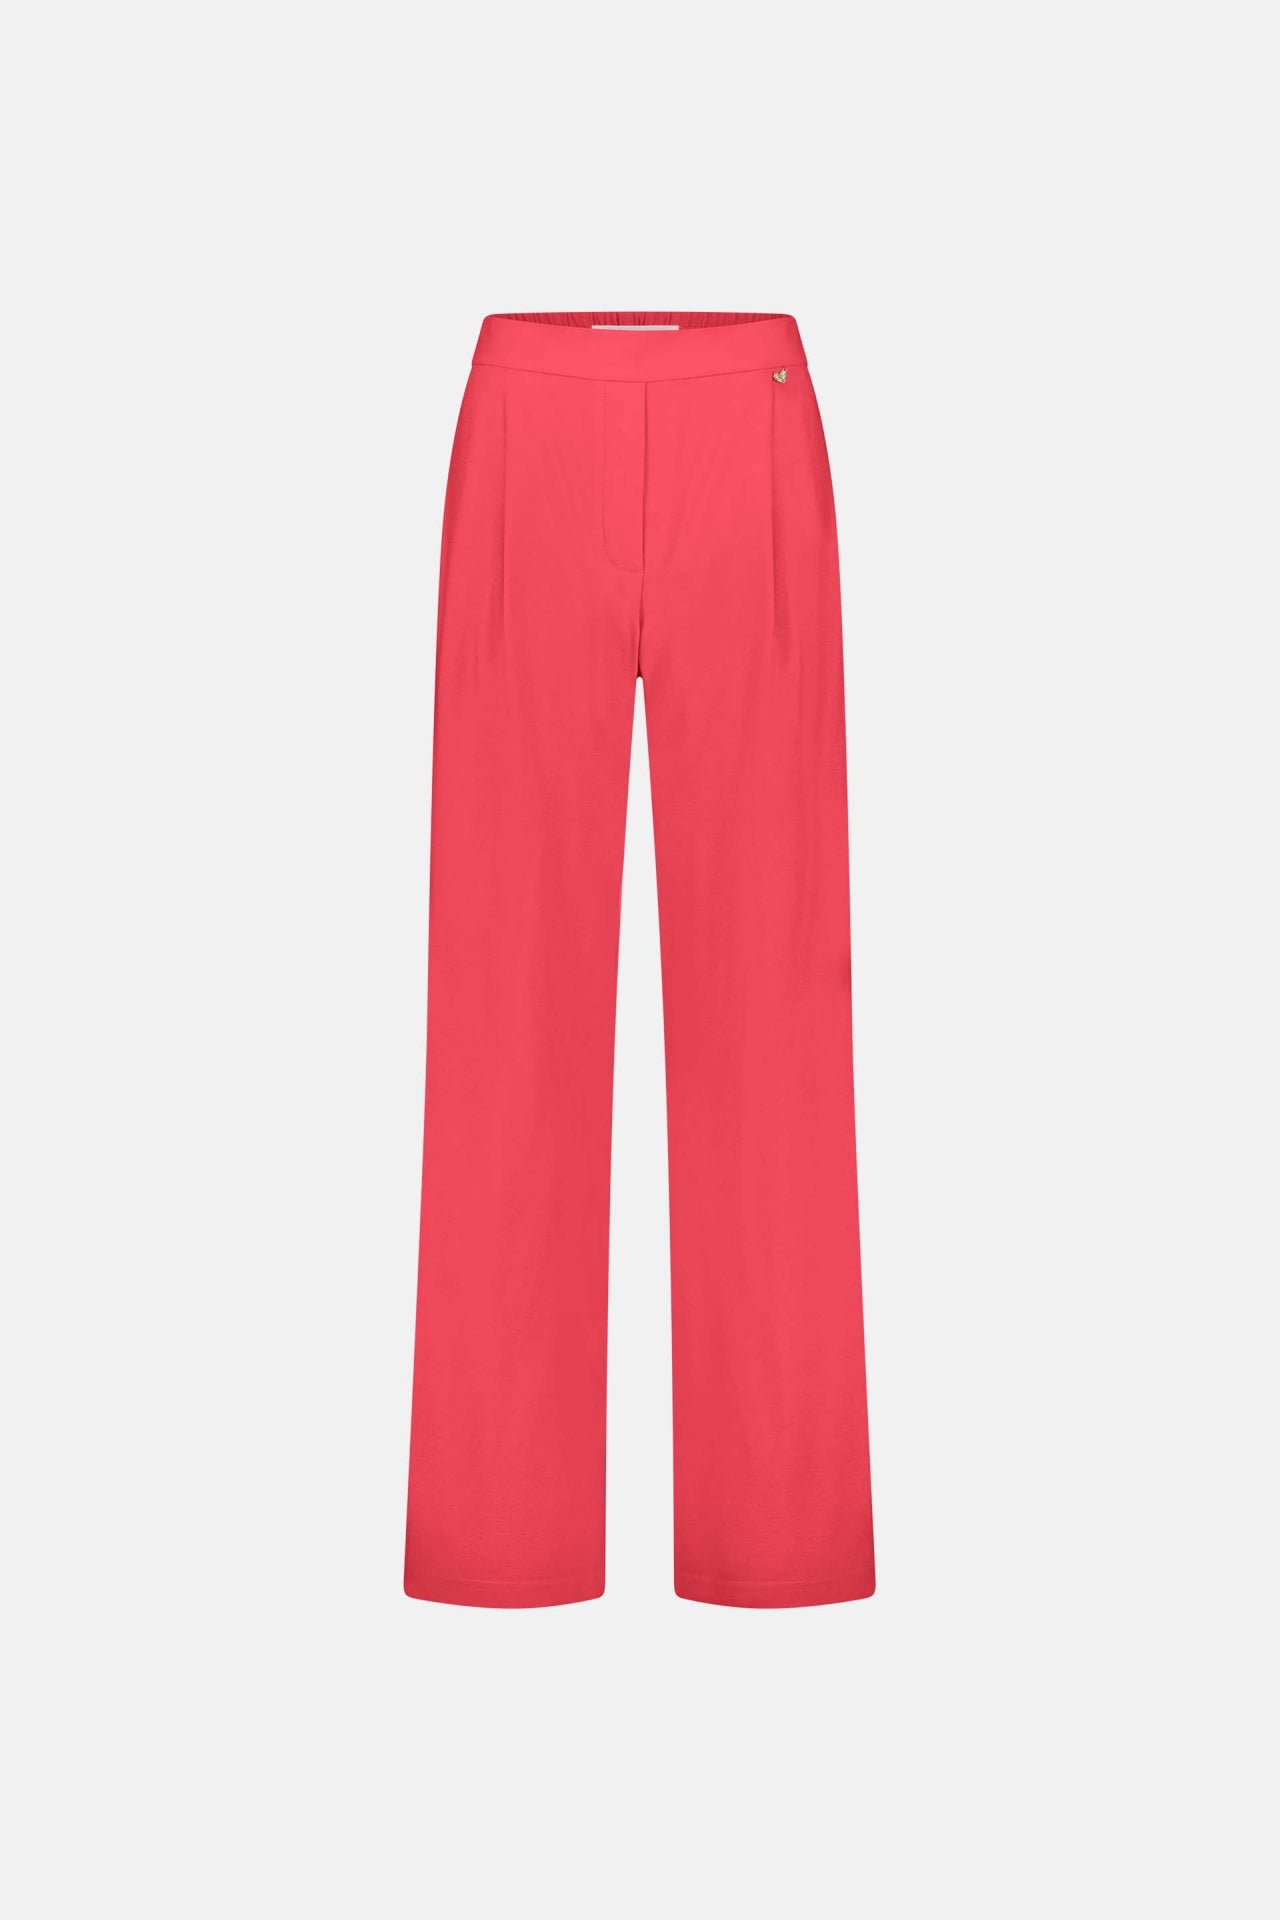 Neale Trousers | Tomato